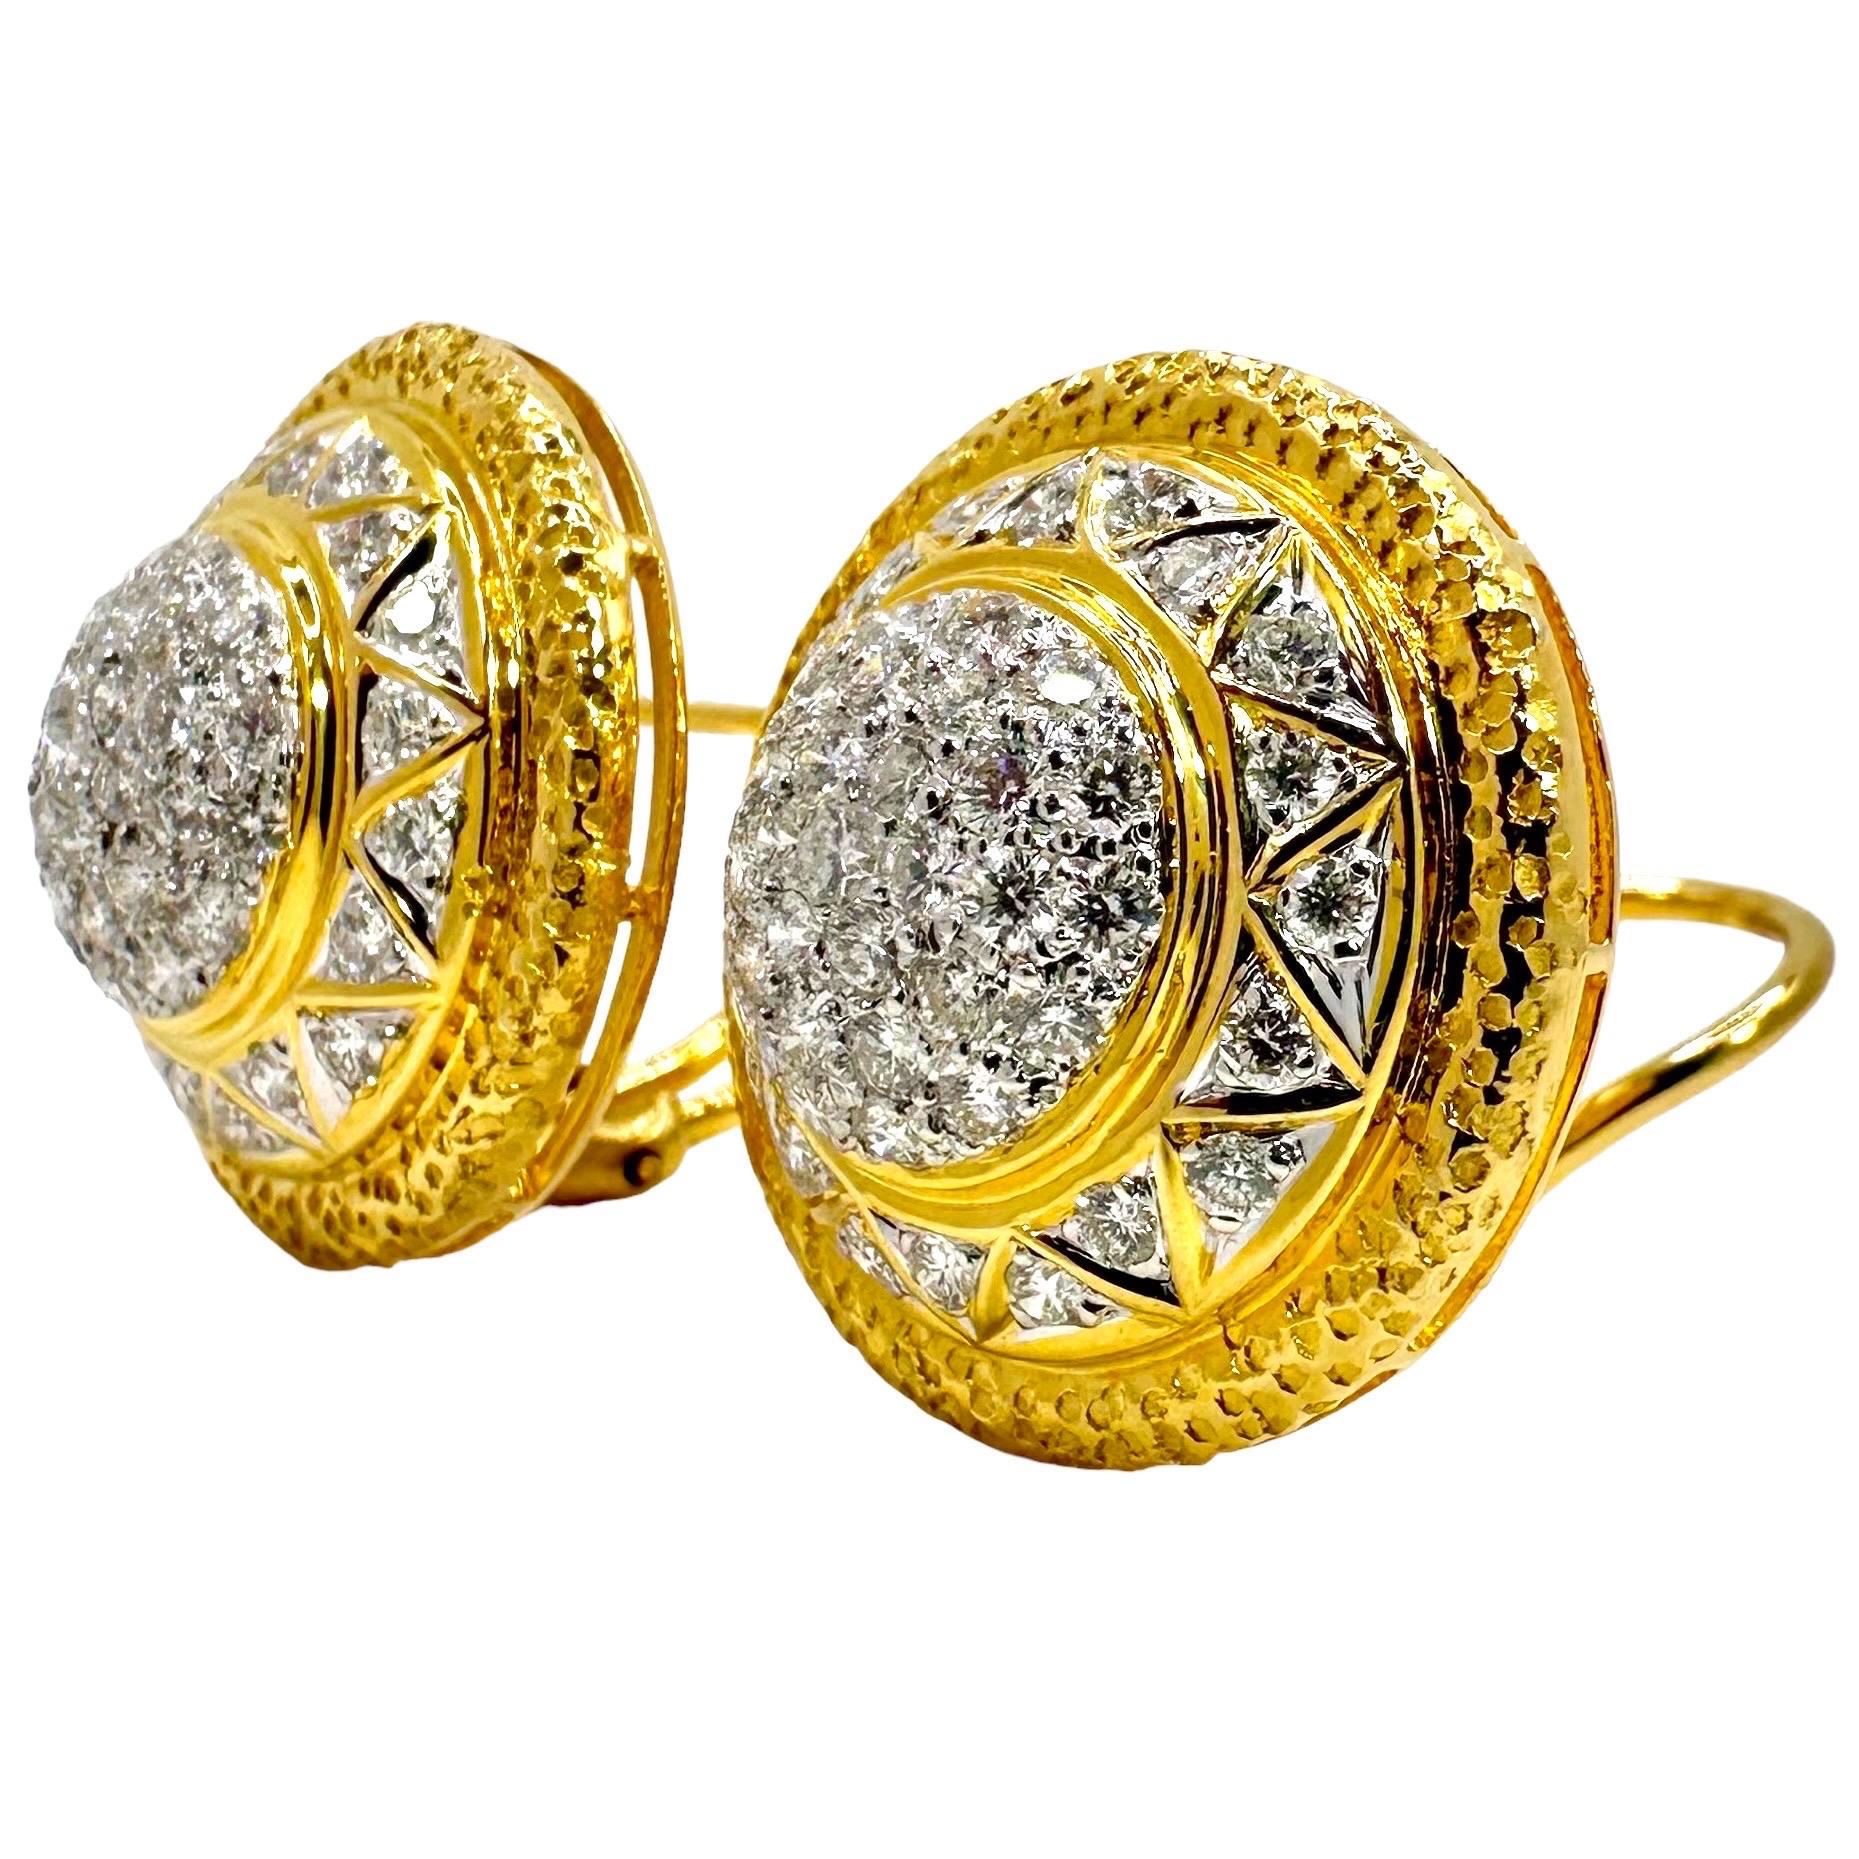 Modern 18K Stylish & Tailored Gold & Diamond Encrusted Dome Earrings 7/8 Inch Diameter For Sale